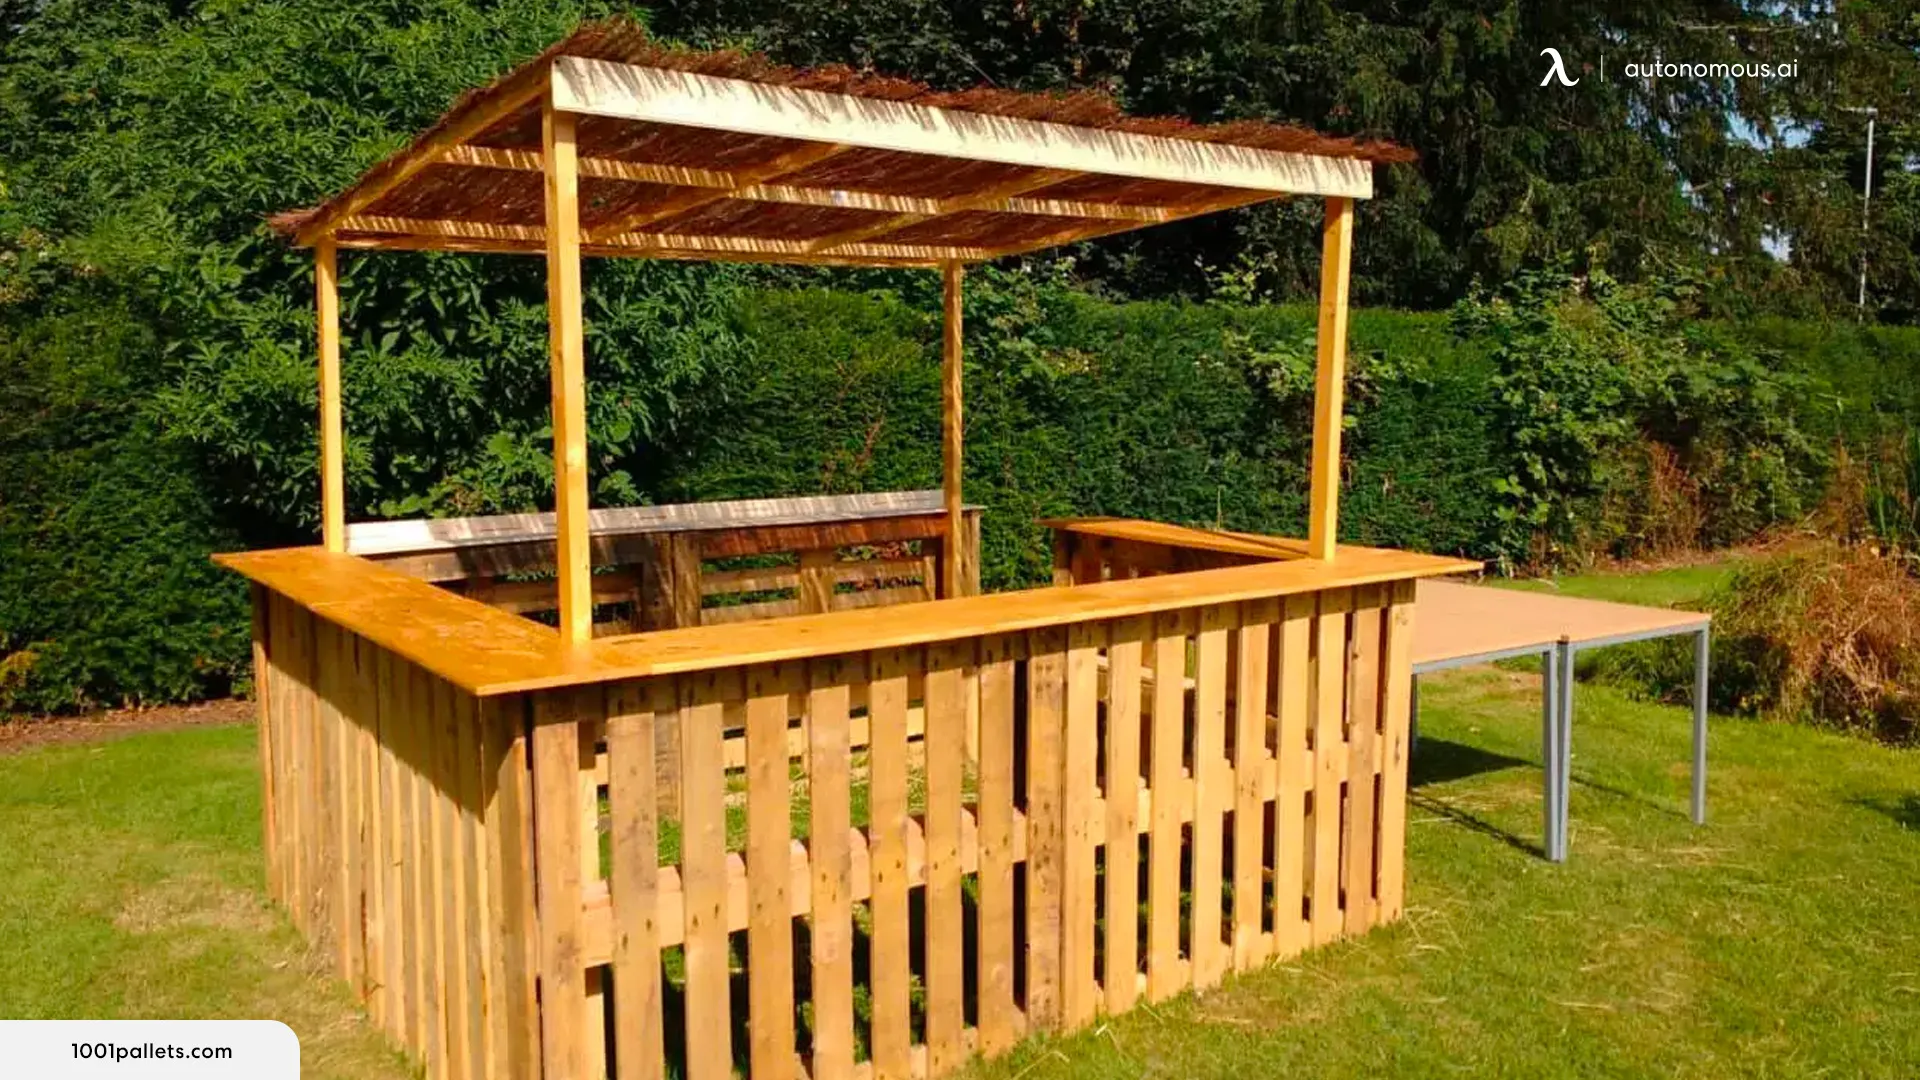 Outdoor Pallet Bar with a Roof - Outdoor bar plans with a roof